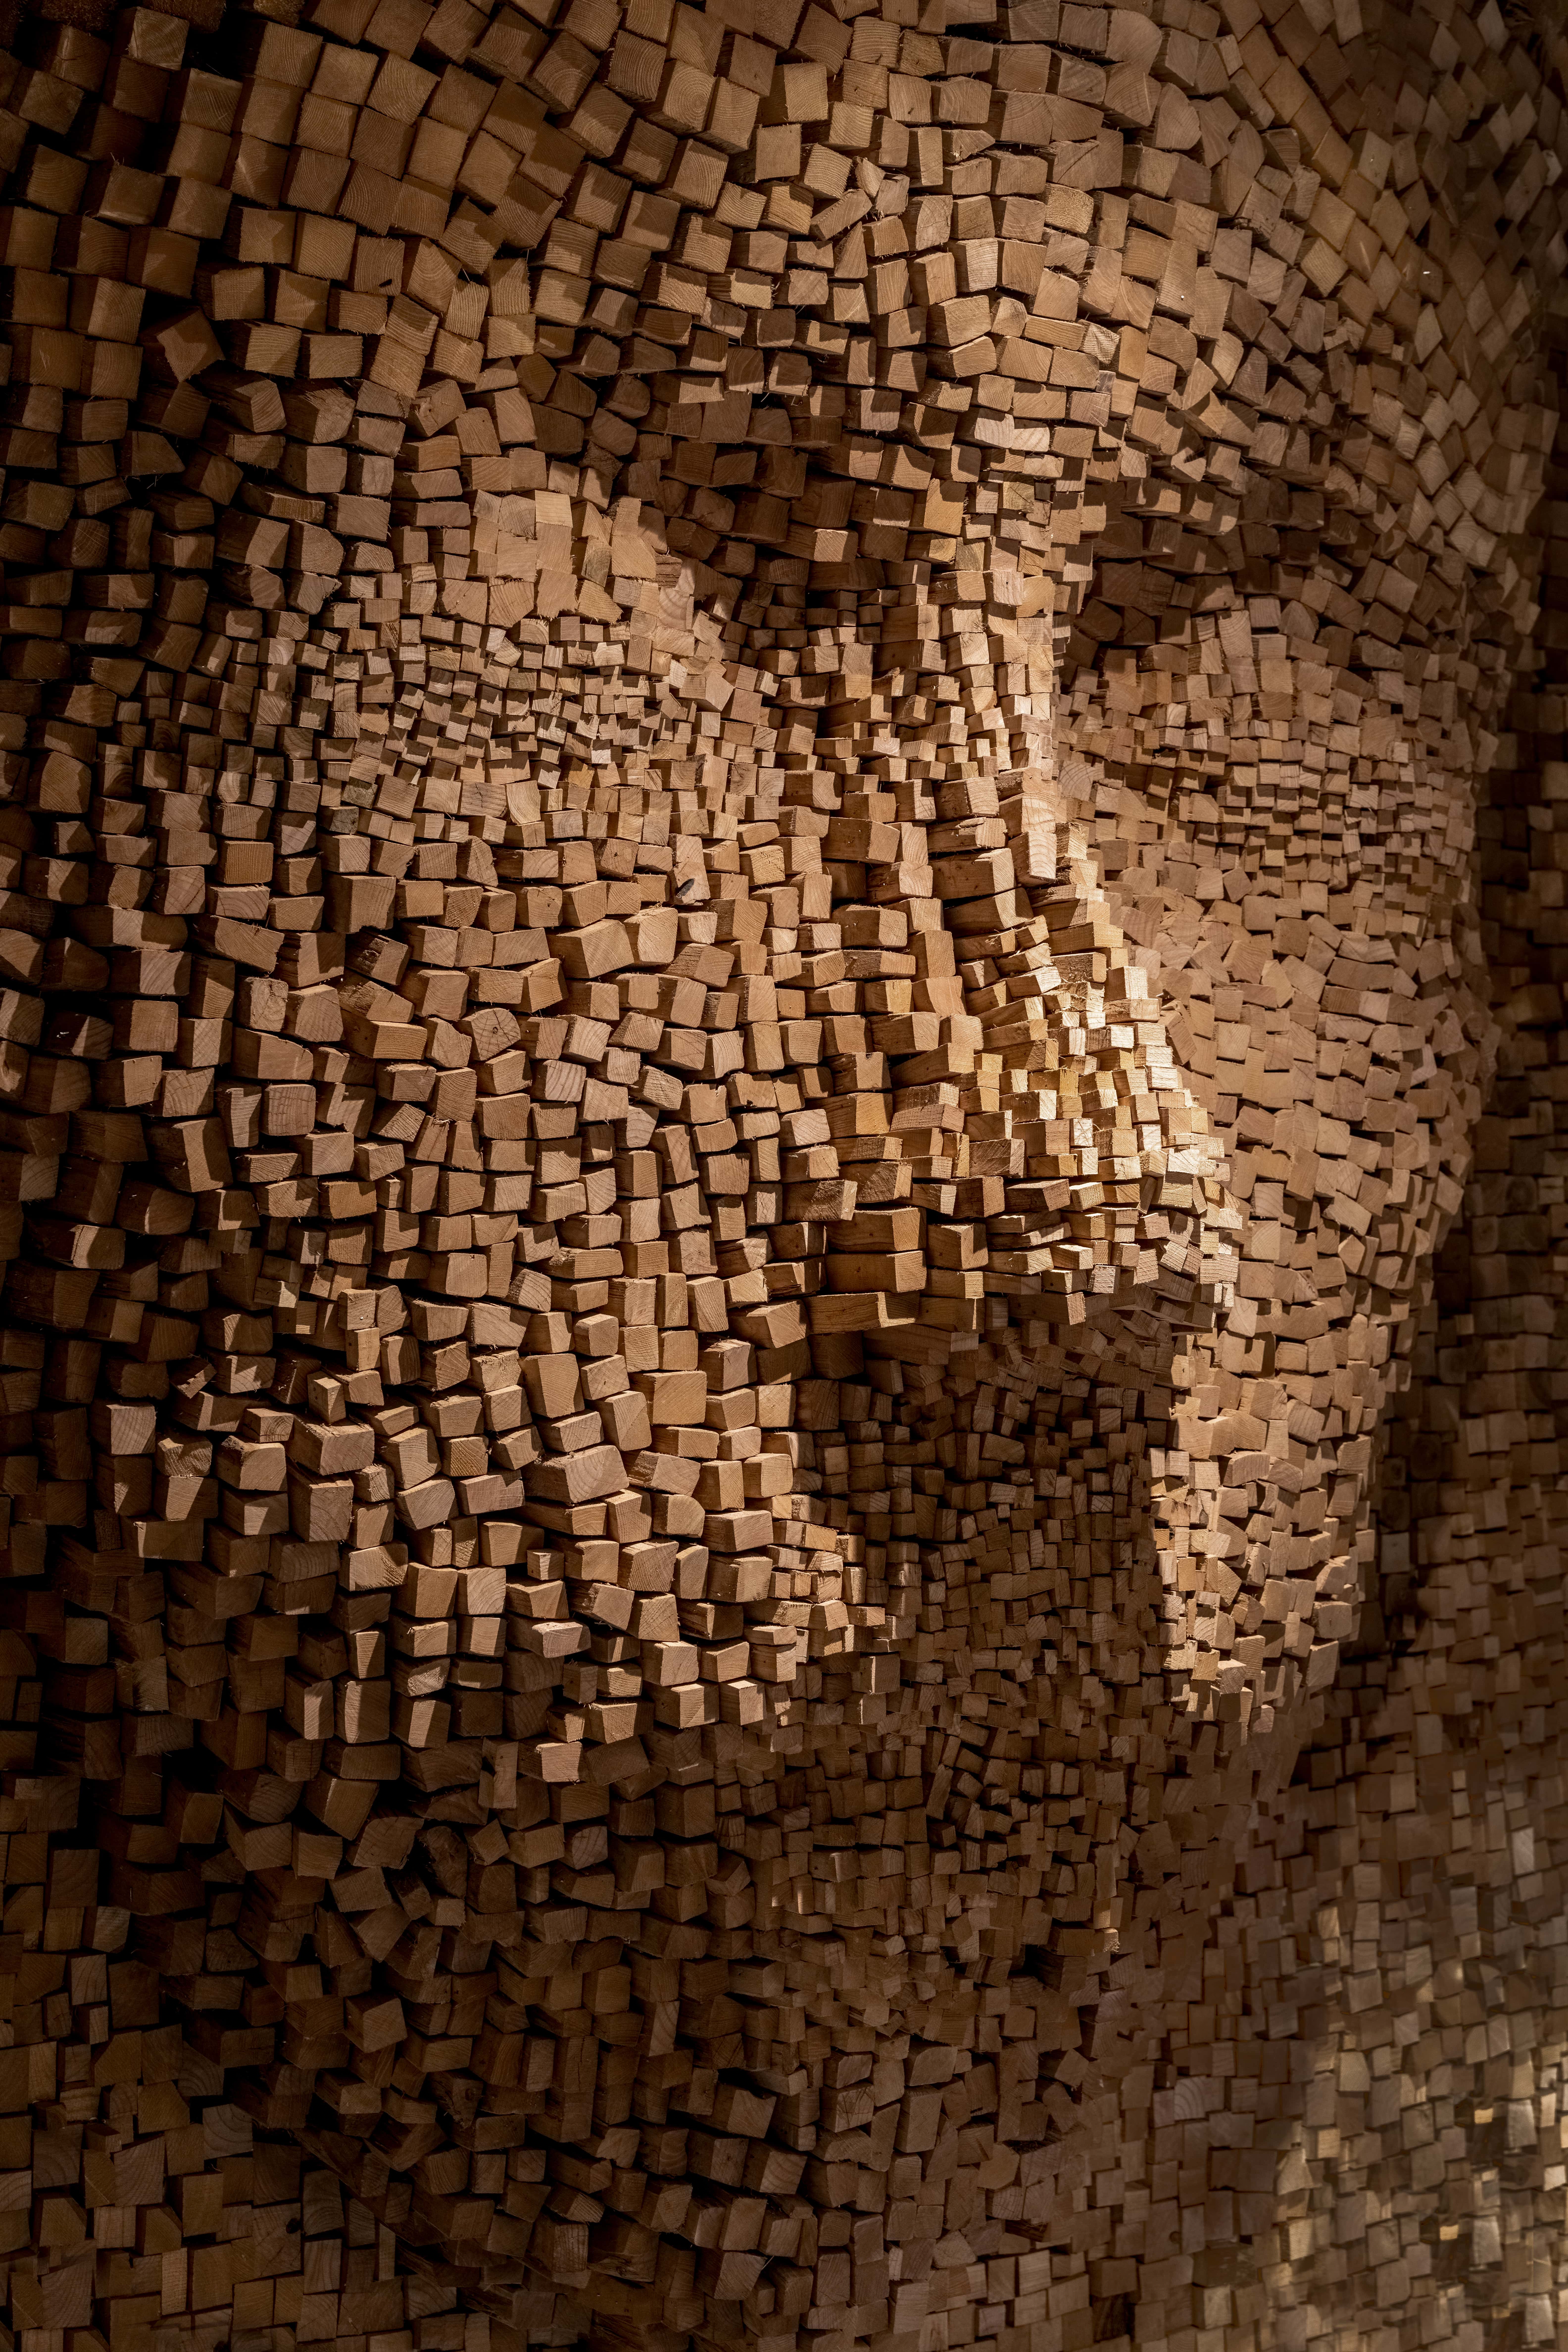 (3D artwork with a man's face as a symbol of self-satisfaction and the world)